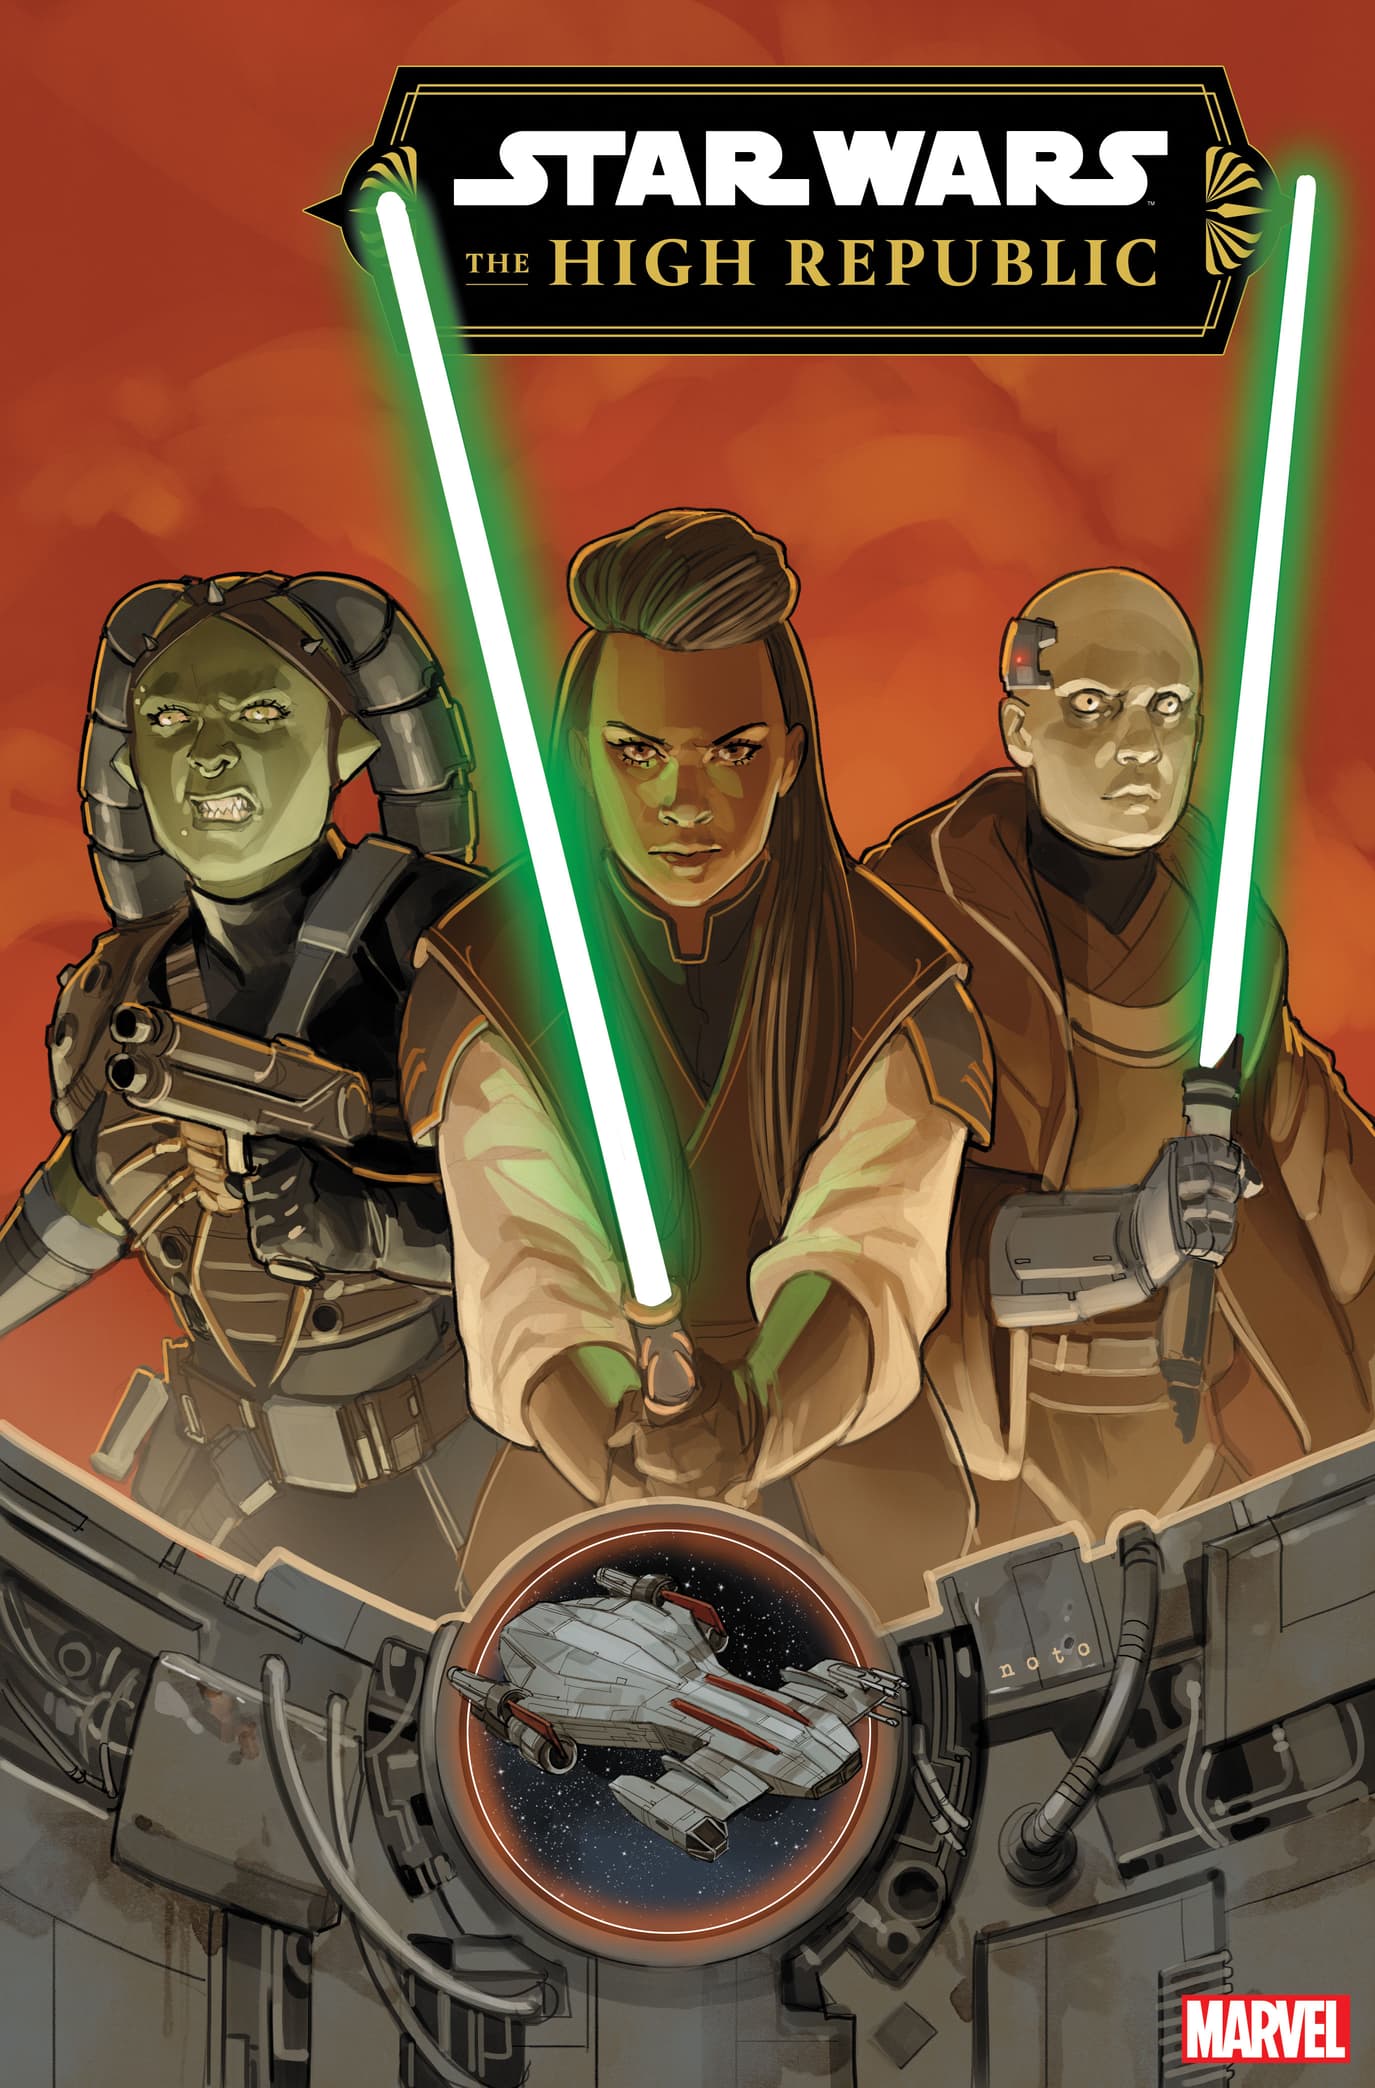 STAR WARS: THE HIGH REPUBLIC #1 [PHASE III] cover by Phil Noto